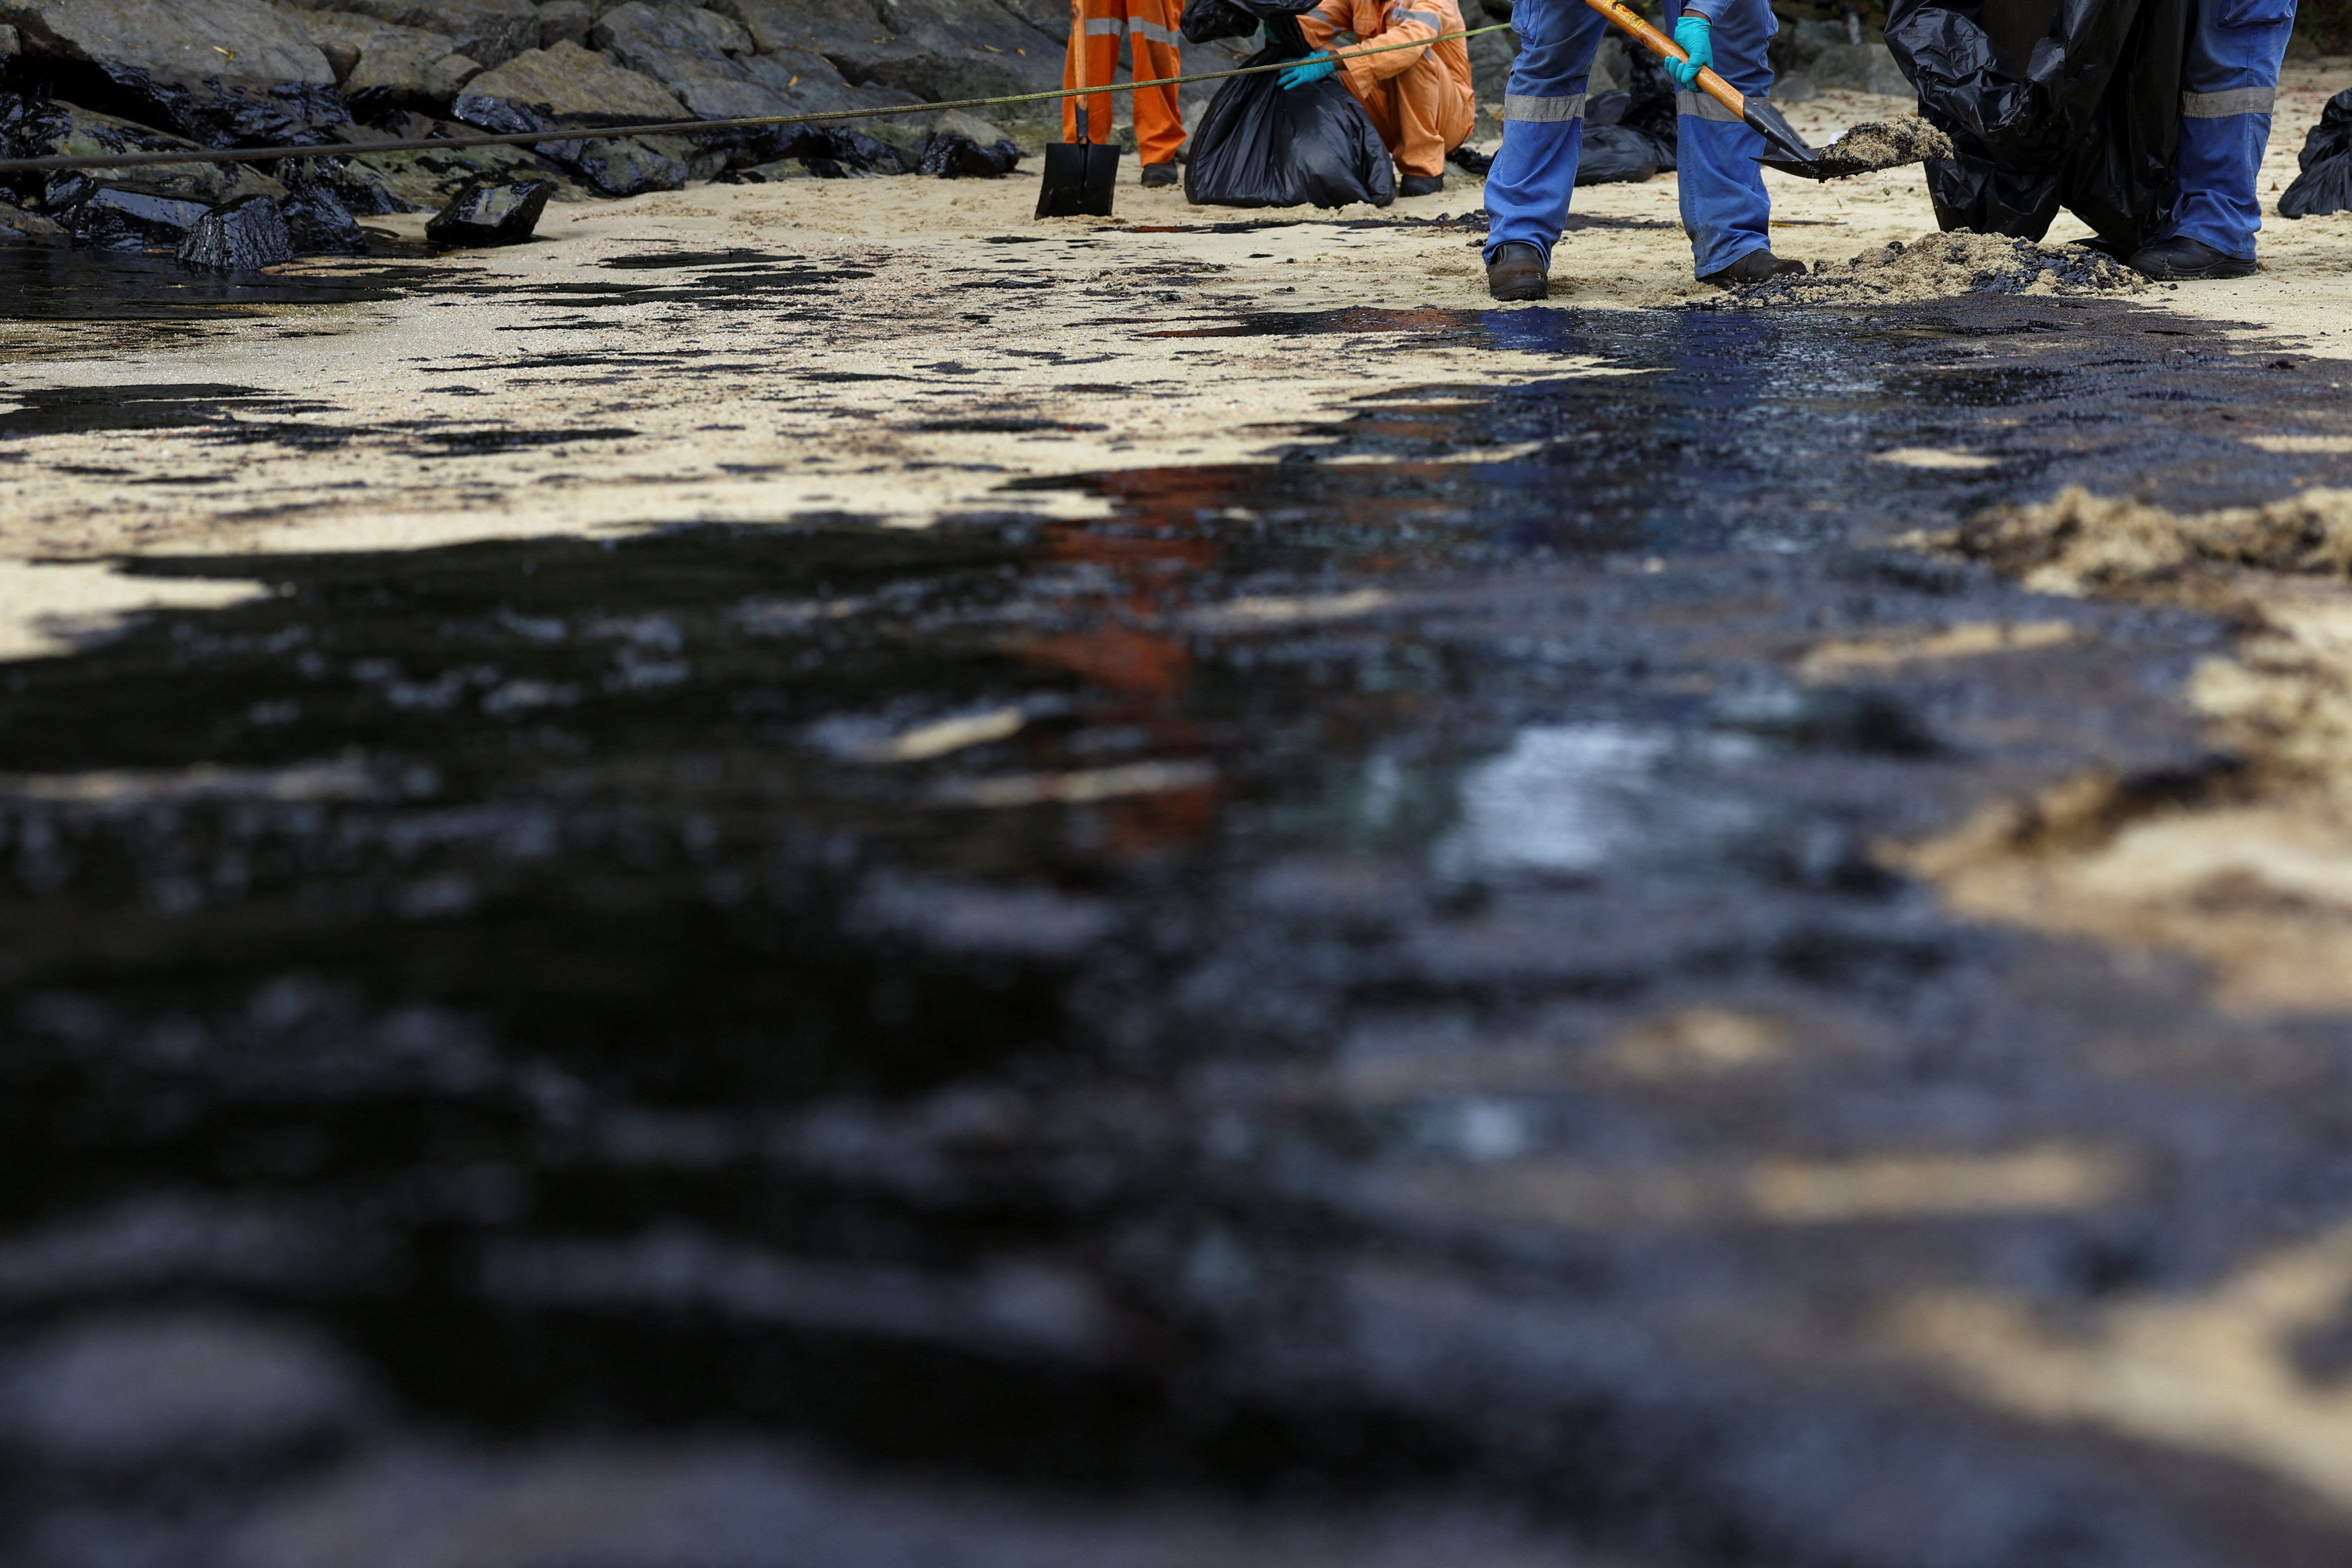 Workers clean up the oil slick on Sentosa Island’s Tanjong Beach in Singapore on Sunday. Photo: Reuters